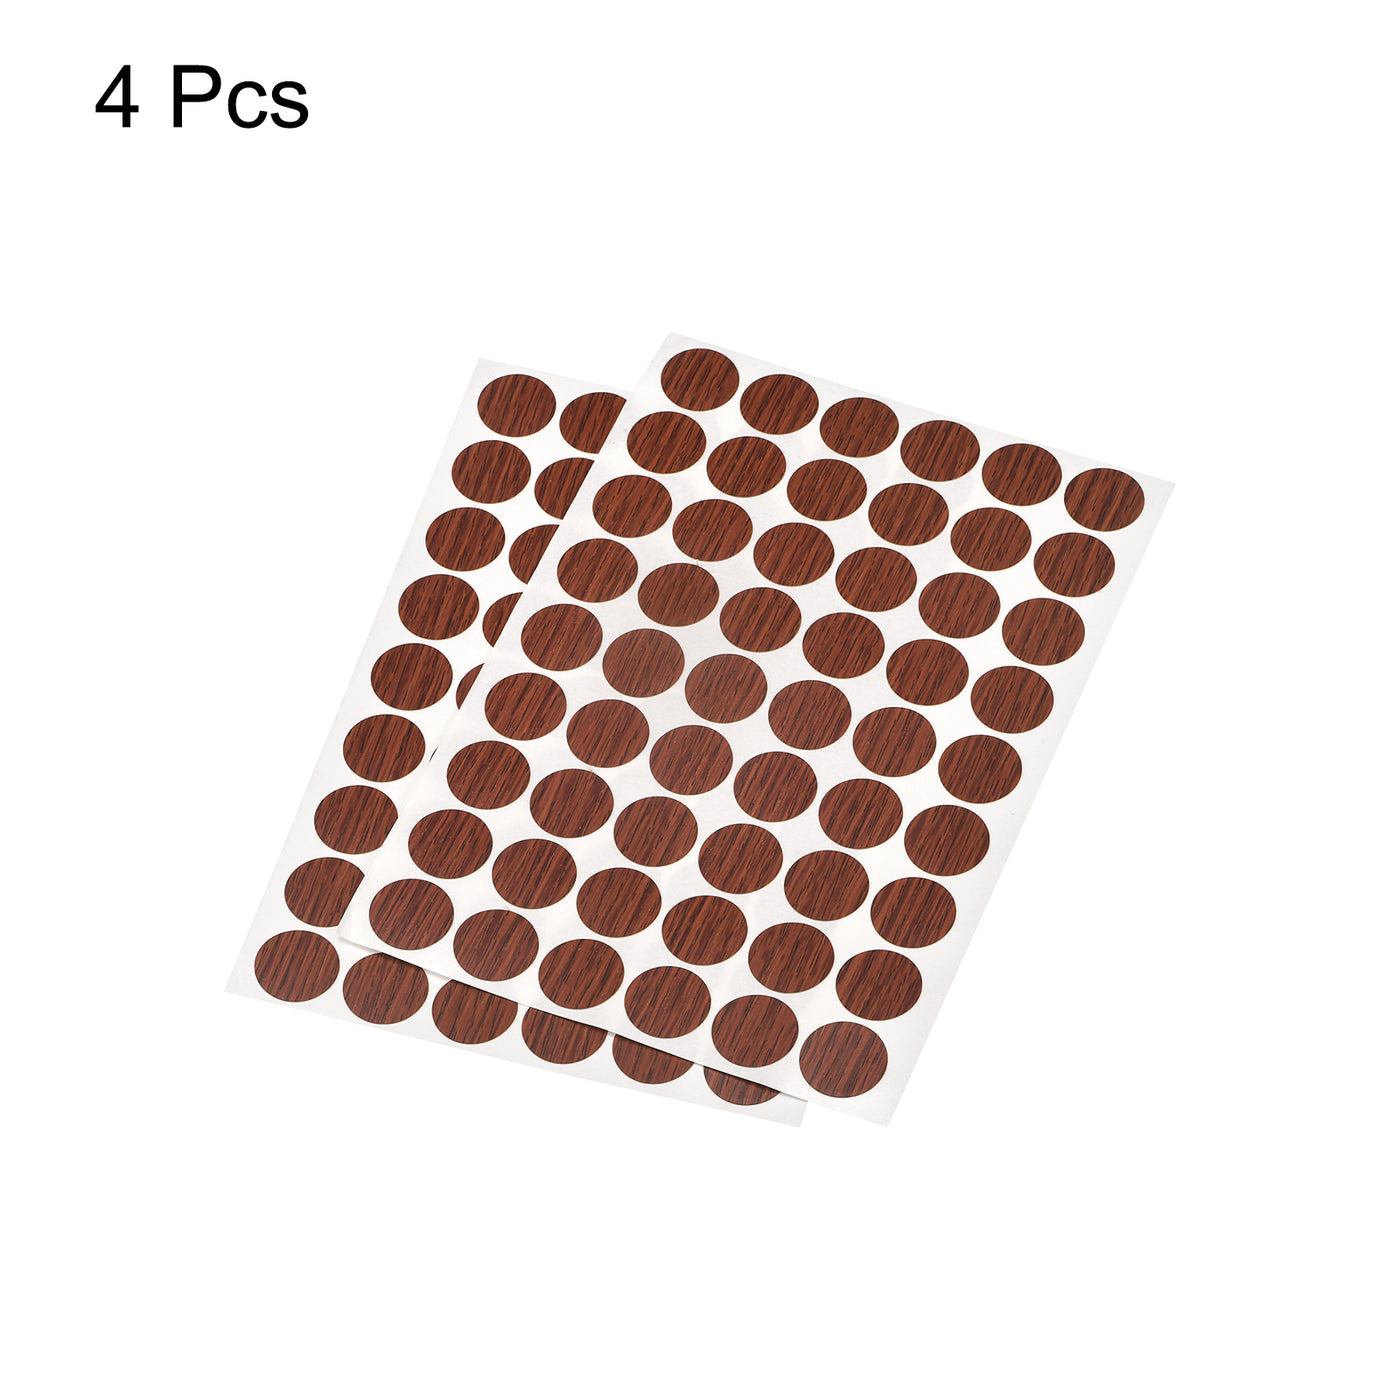 uxcell Uxcell Screw Hole Cover Stickers, 21mm Dia PVC Self Adhesive Covers Caps for Wood Furniture Cabinet Shelf Wardrobe, Walnut 4 Sheet/216pcs